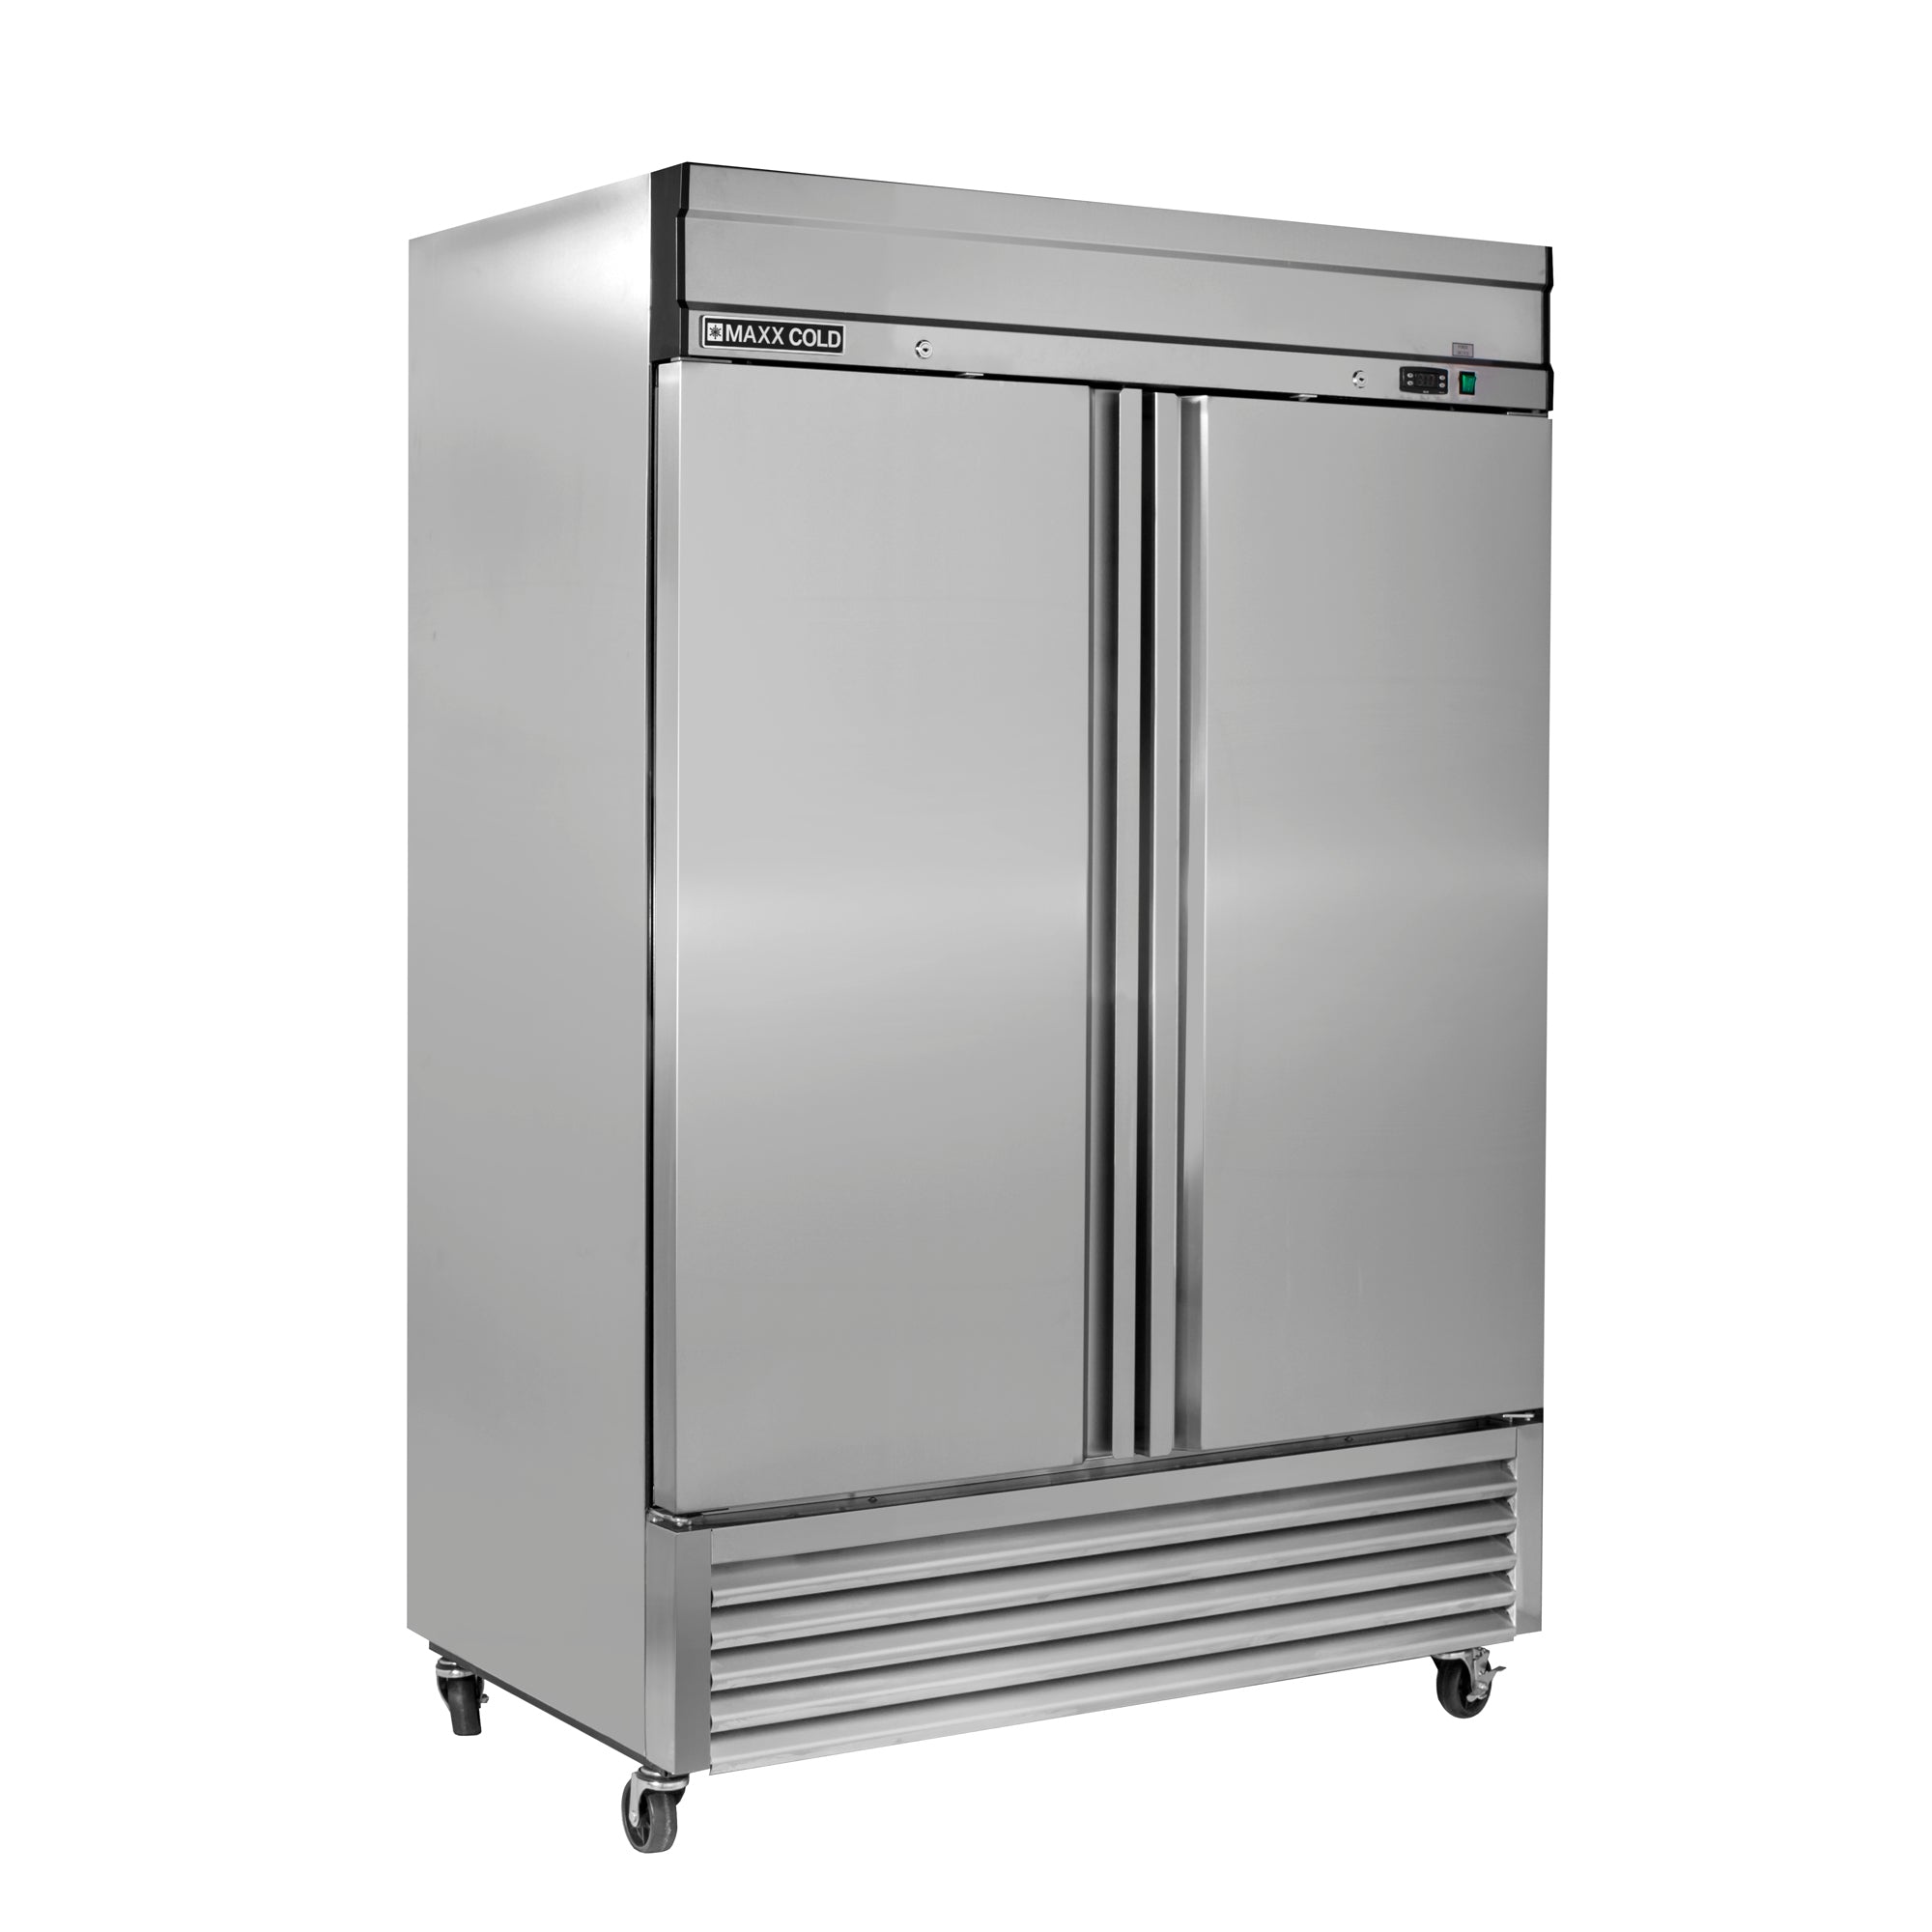 Maxx Cold - MXSF-49FDHC, Maxx Cold Bottom Mount 2 Door Reach-In Freezer, 54" W, 42.9 Cu Ft, in Stainless Steel